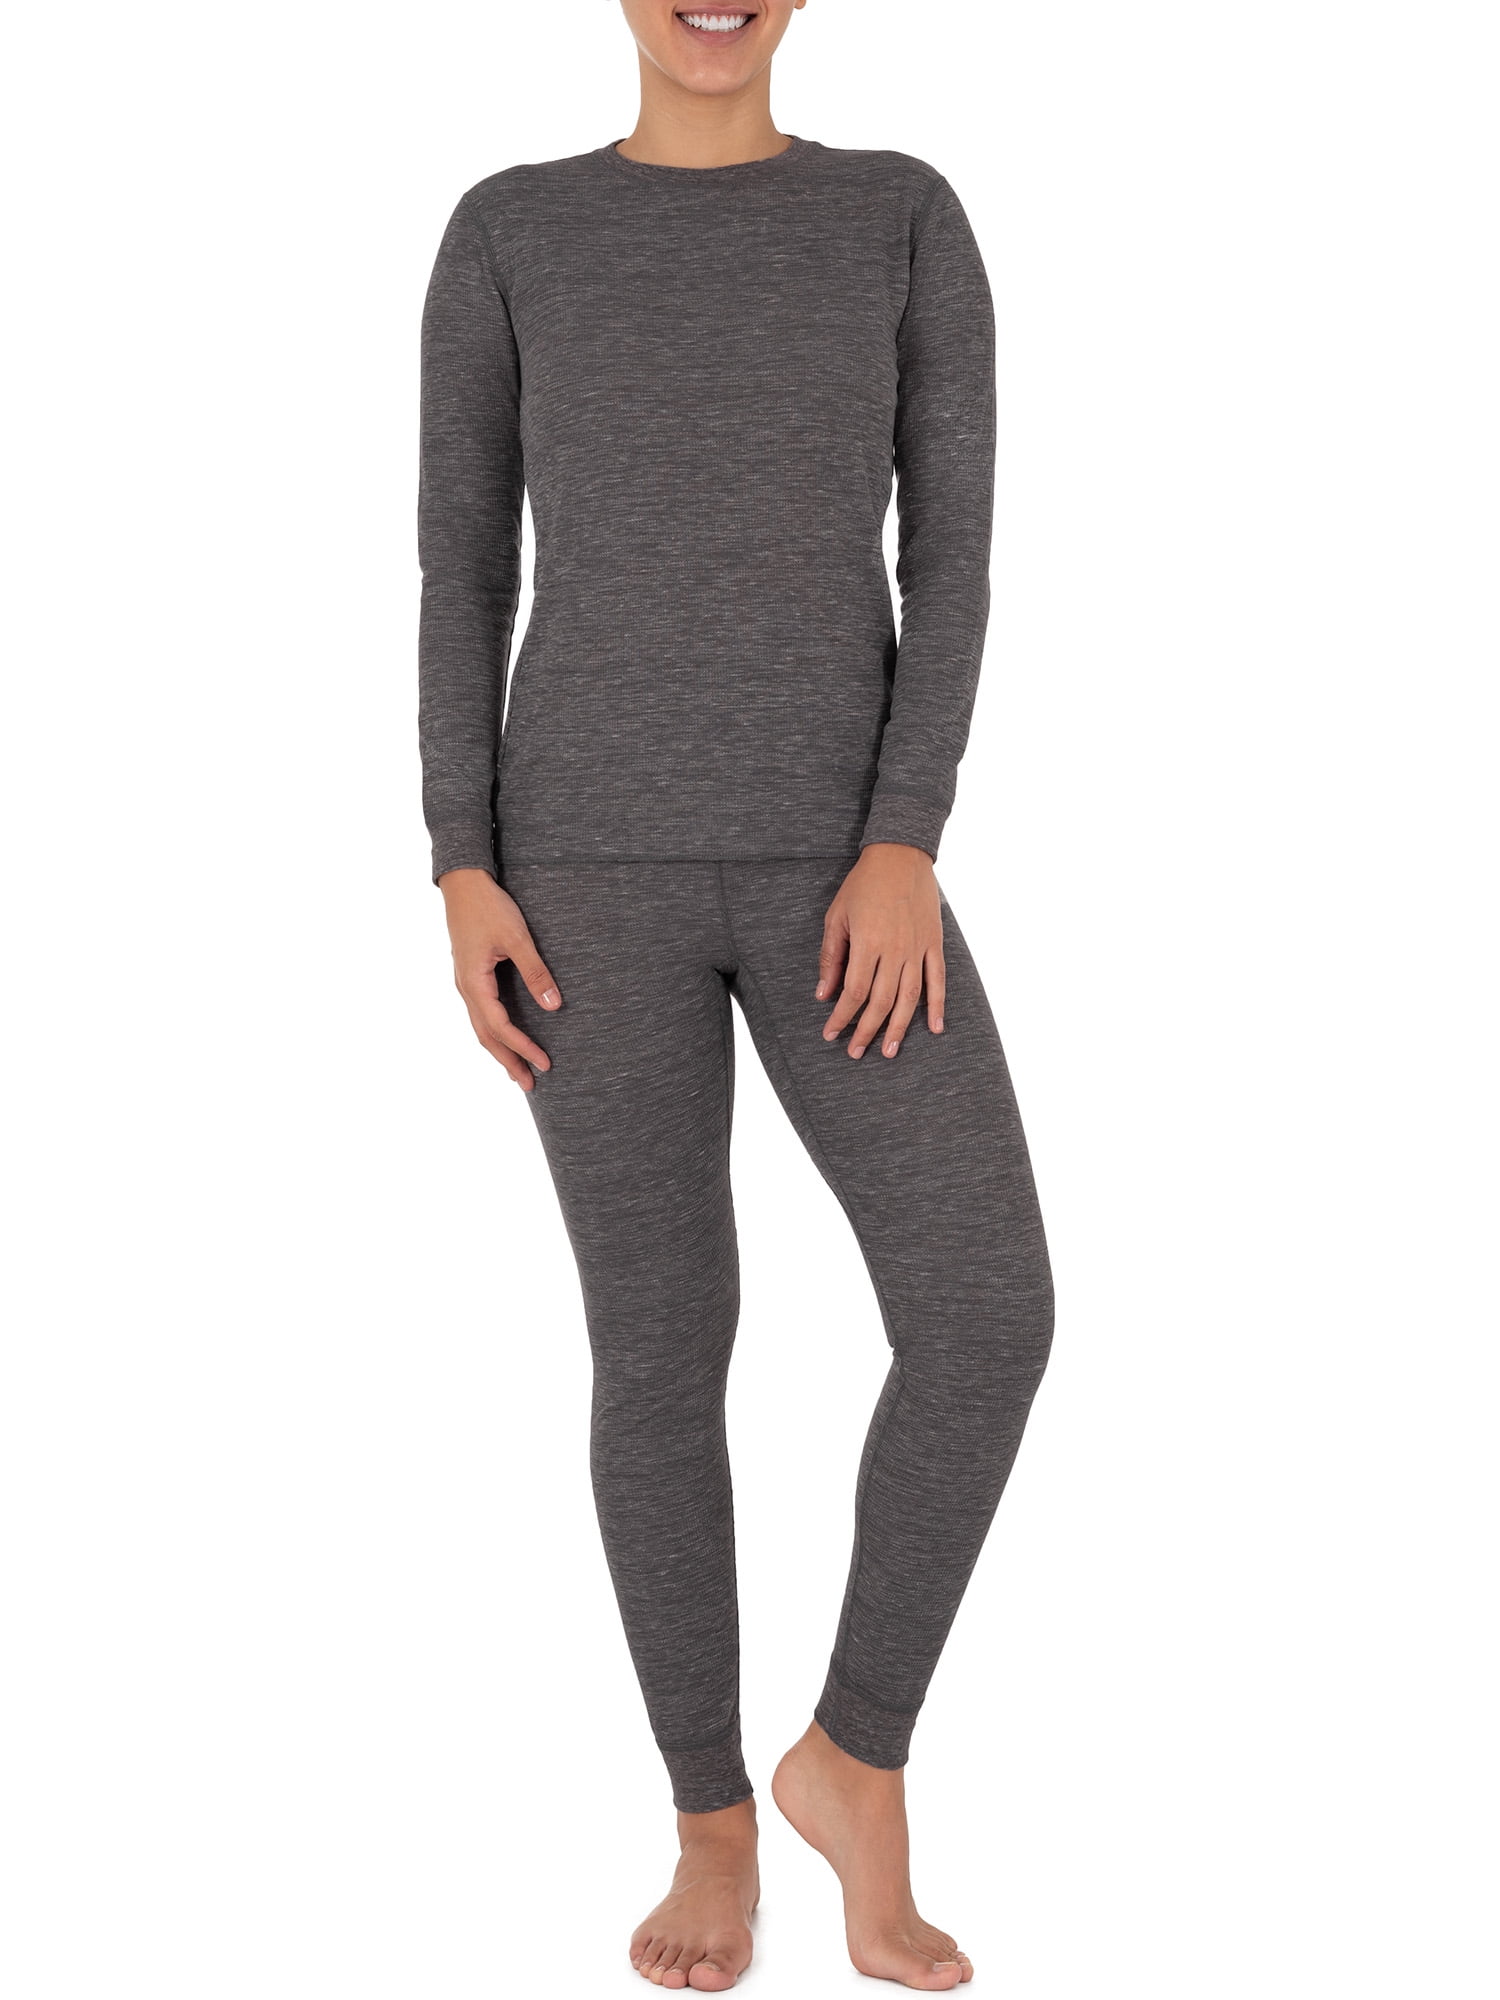 Fruit of the Loom Women's and Women's Plus Long Underwear Thermal ...